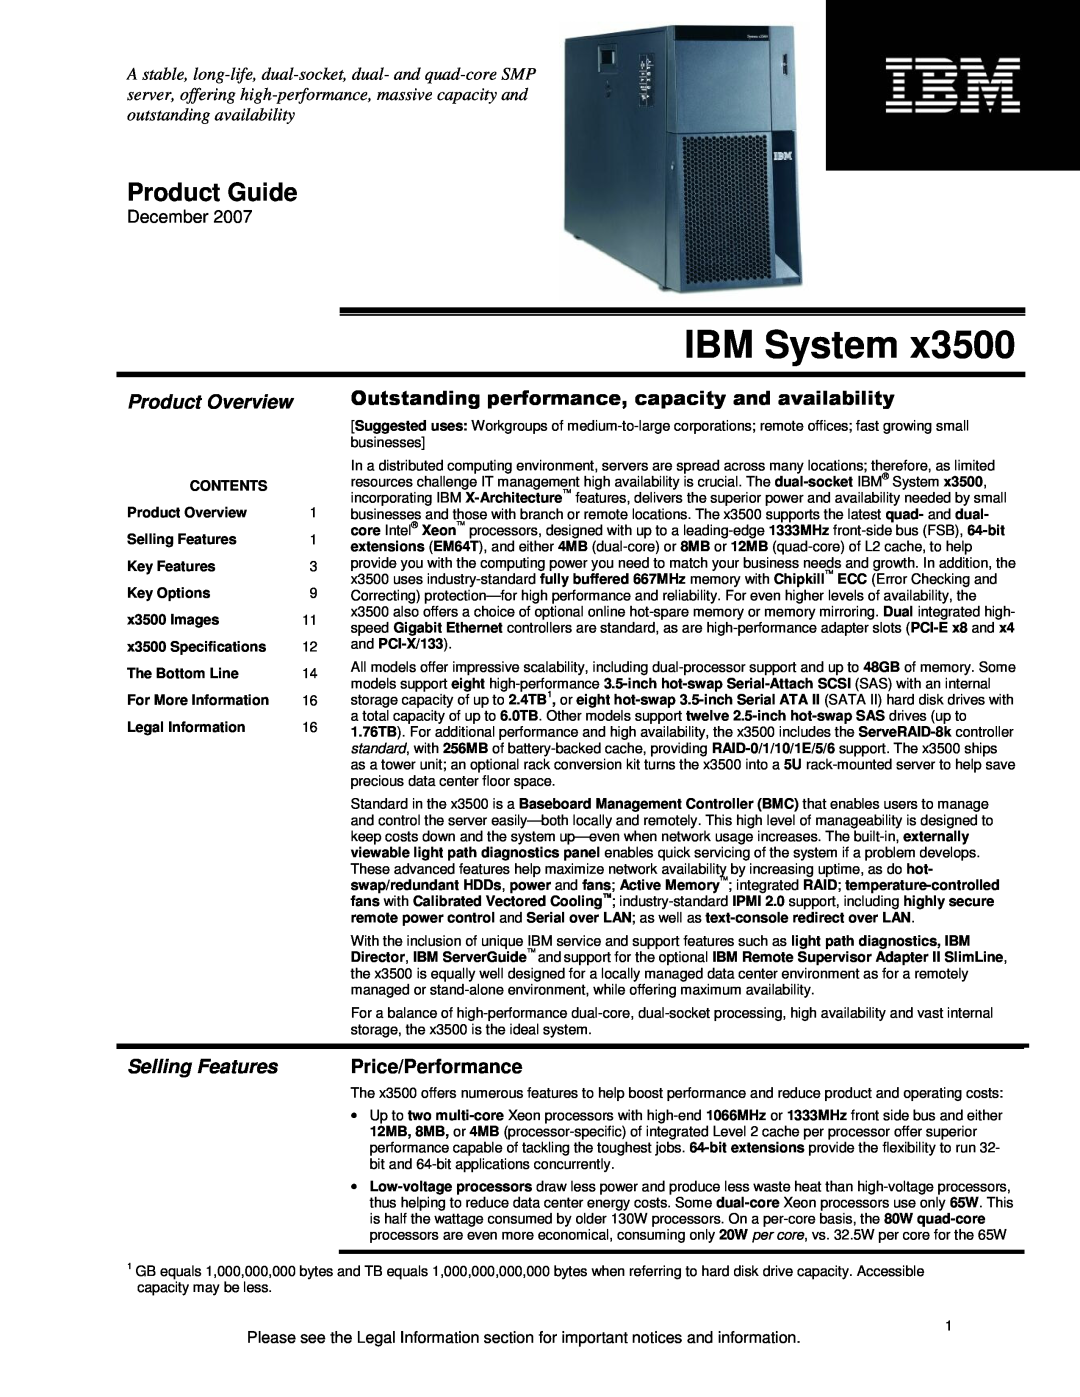 IBM X3500 specifications Product Overview, Selling Features, Price/Performance, December, IBM System, Product Guide 